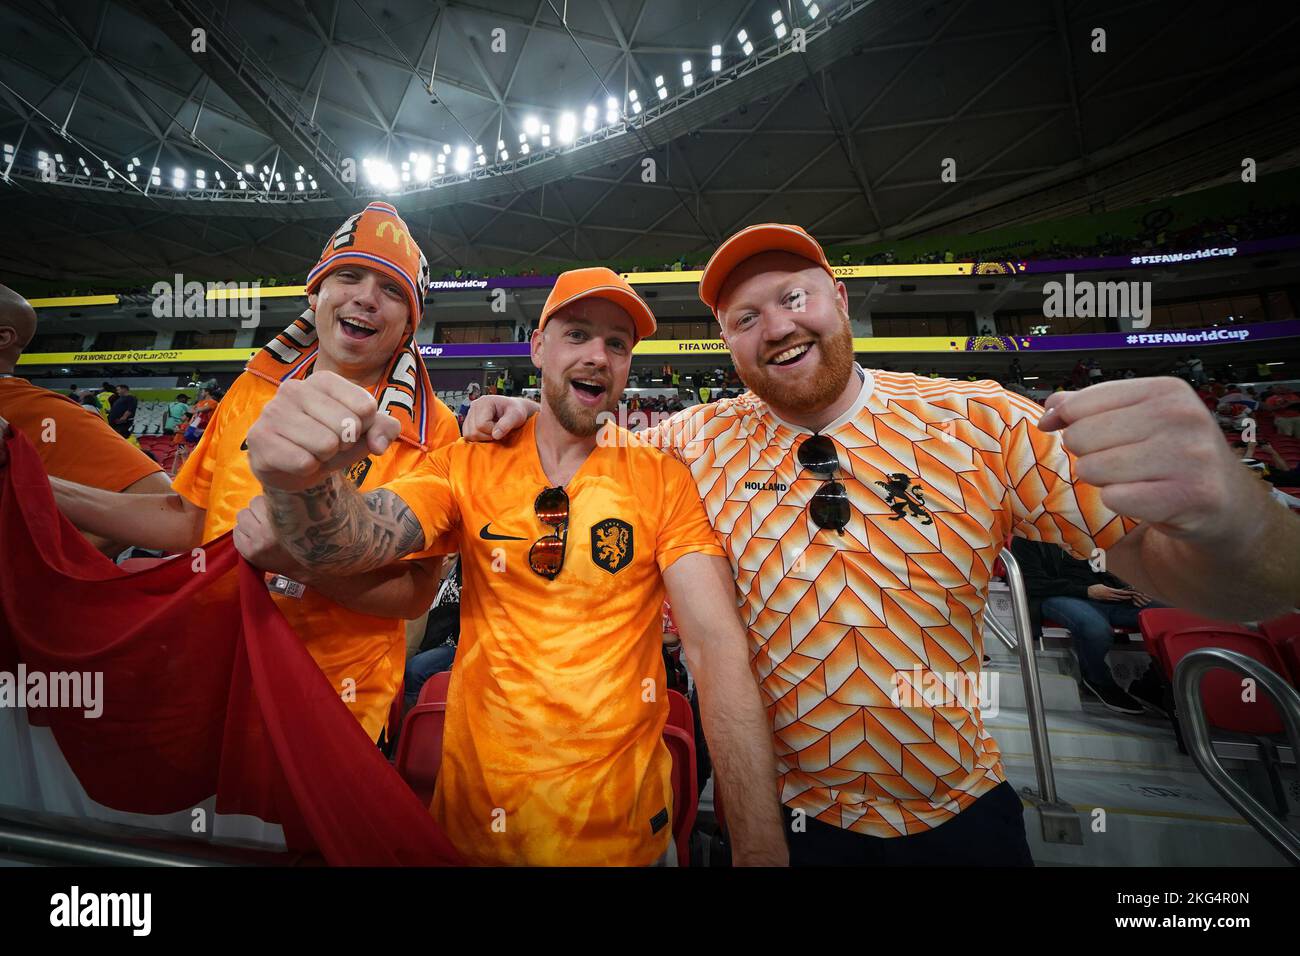 Doha, Qatar. 21st Nov, 2022. DOHA, QATAR - NOVEMBER 21: Supporter of Netherlands celebrates before FIFA World Cup Qatar 2022 group A match between Senegal and Netherlands at Al Thumama Stadium on November 21, 2022 in Doha, Qatar. (Photo by Florencia Tan Jun/PxImages) Credit: Px Images/Alamy Live News Stock Photo